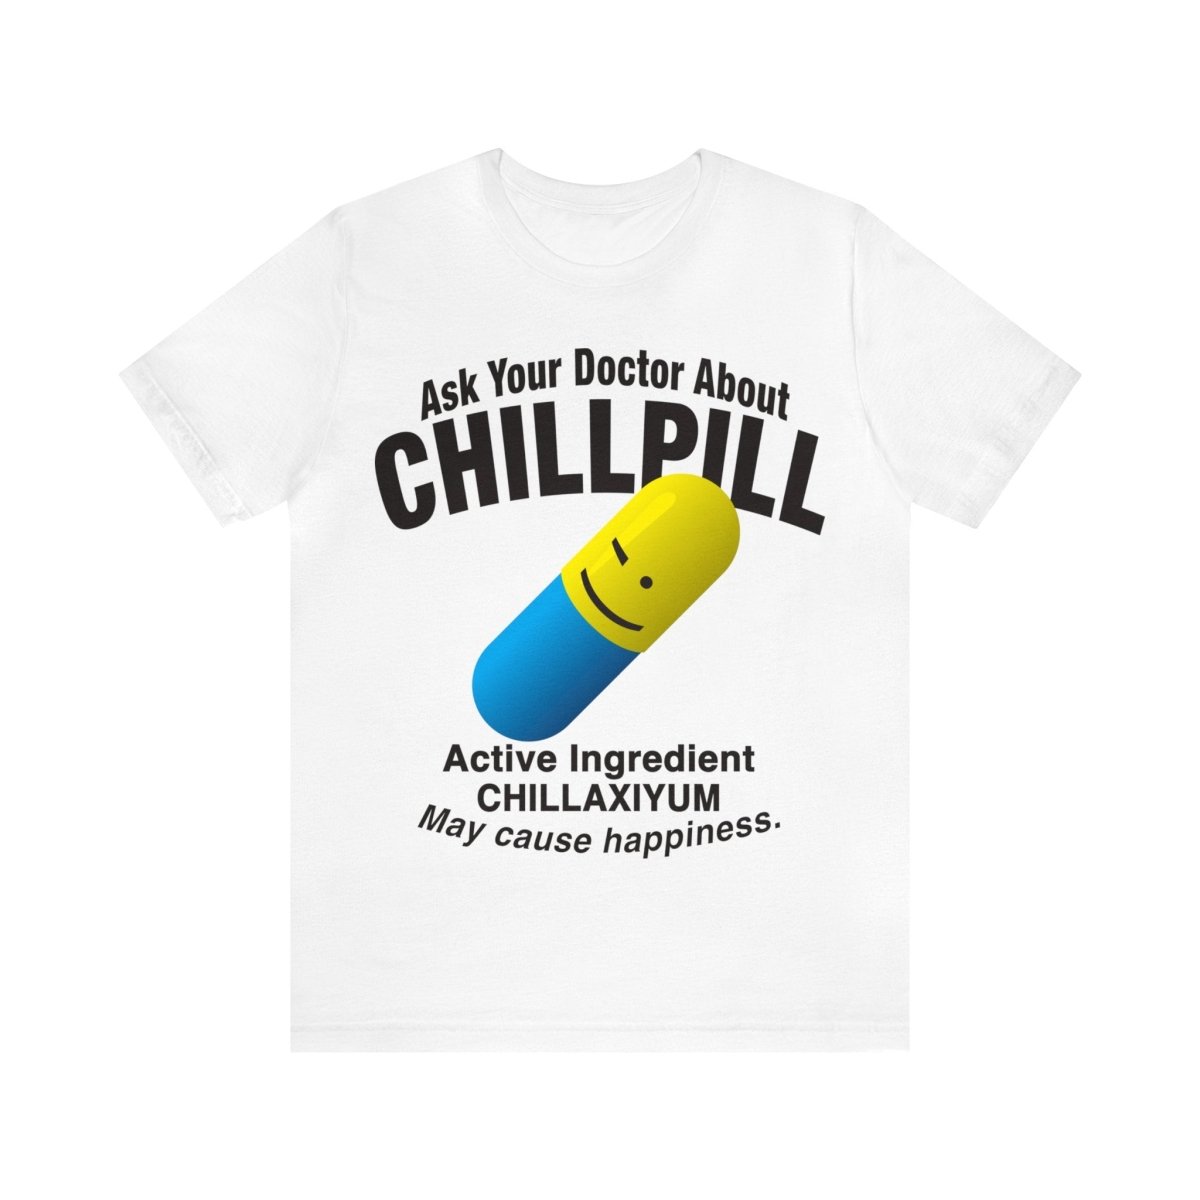 Chill Pill Premium T-Shirt, Ask Your Doctor About It, Active Ingredient CHILLAXIYUM, May Cause Happiness, Relaxation, Weekend, Funny